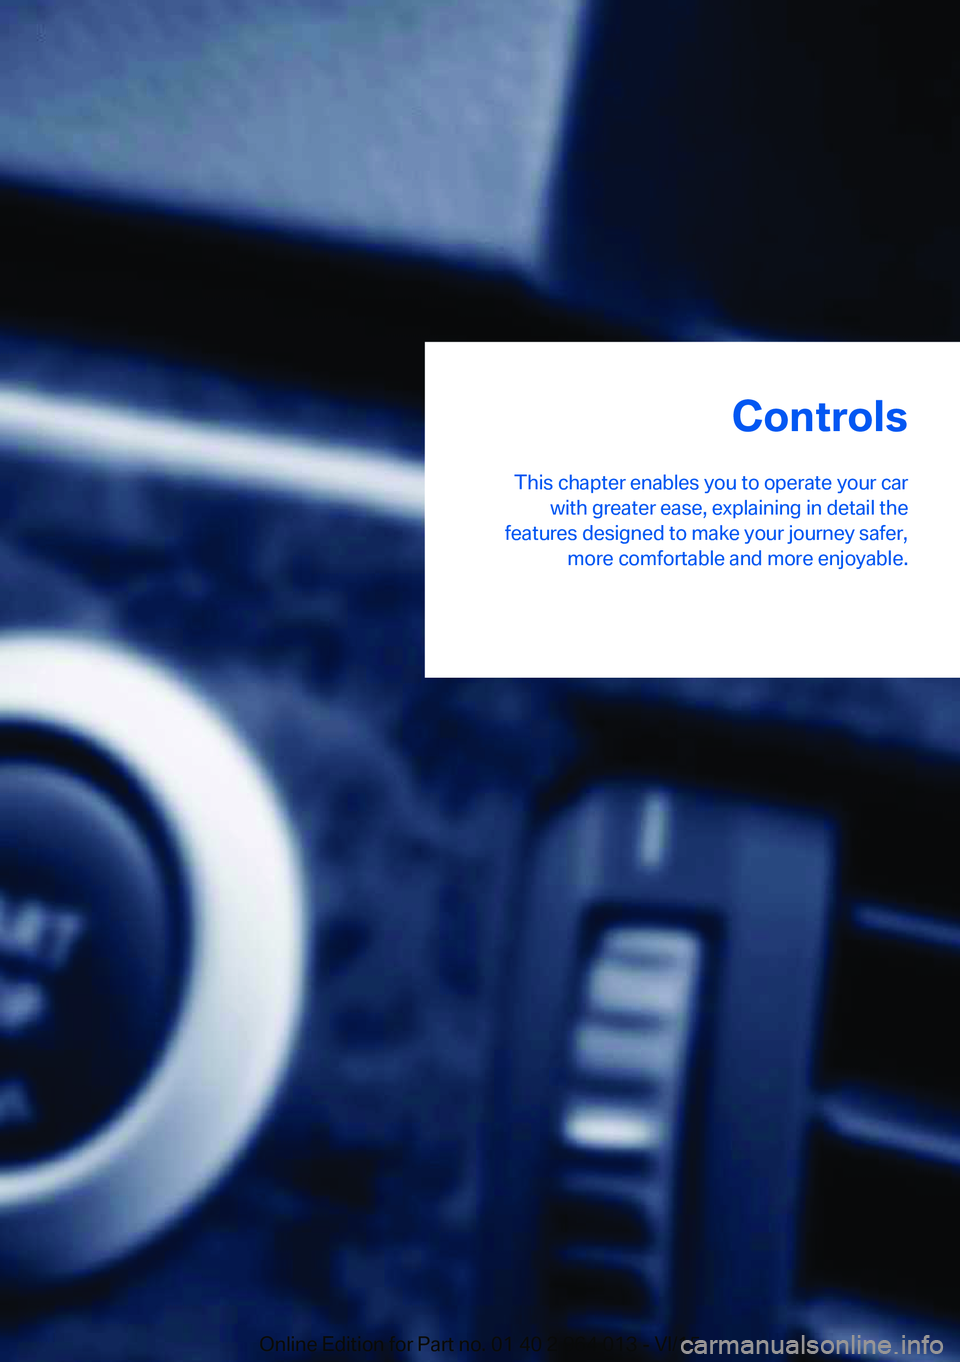 BMW M4 2016 Owners Guide Controls
This chapter enables you to operate your car with greater ease, explaining in detail the
features designed to make your journey safer, more comfortable and more enjoyable.Online Edition for P